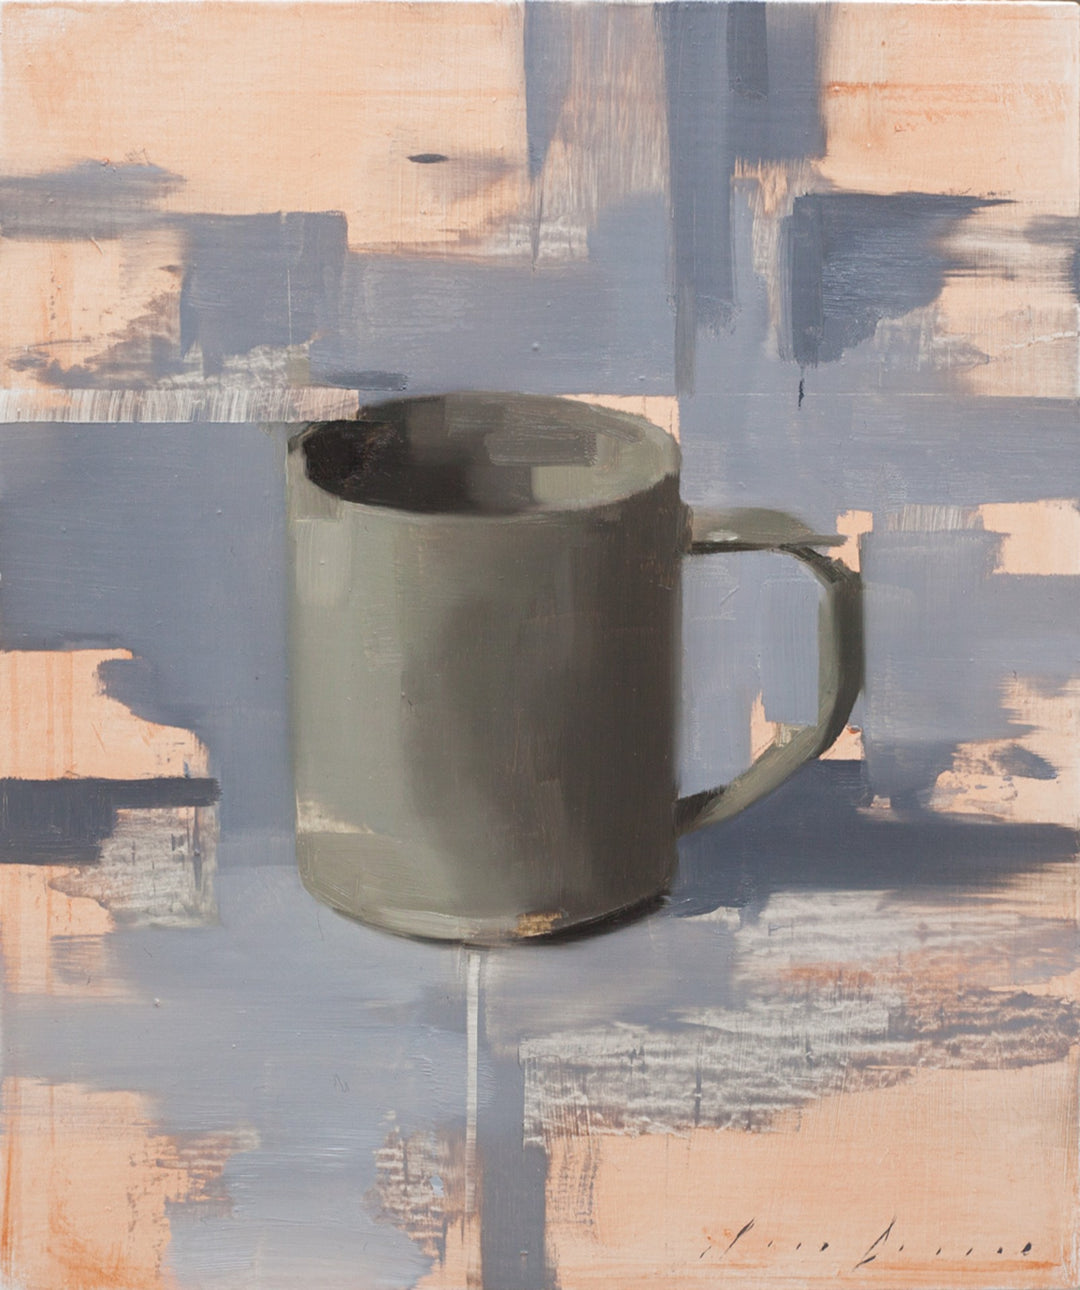 An artist's oil painting of "Dark Cup on Grey" by Jon Doran on a pink and gray background.